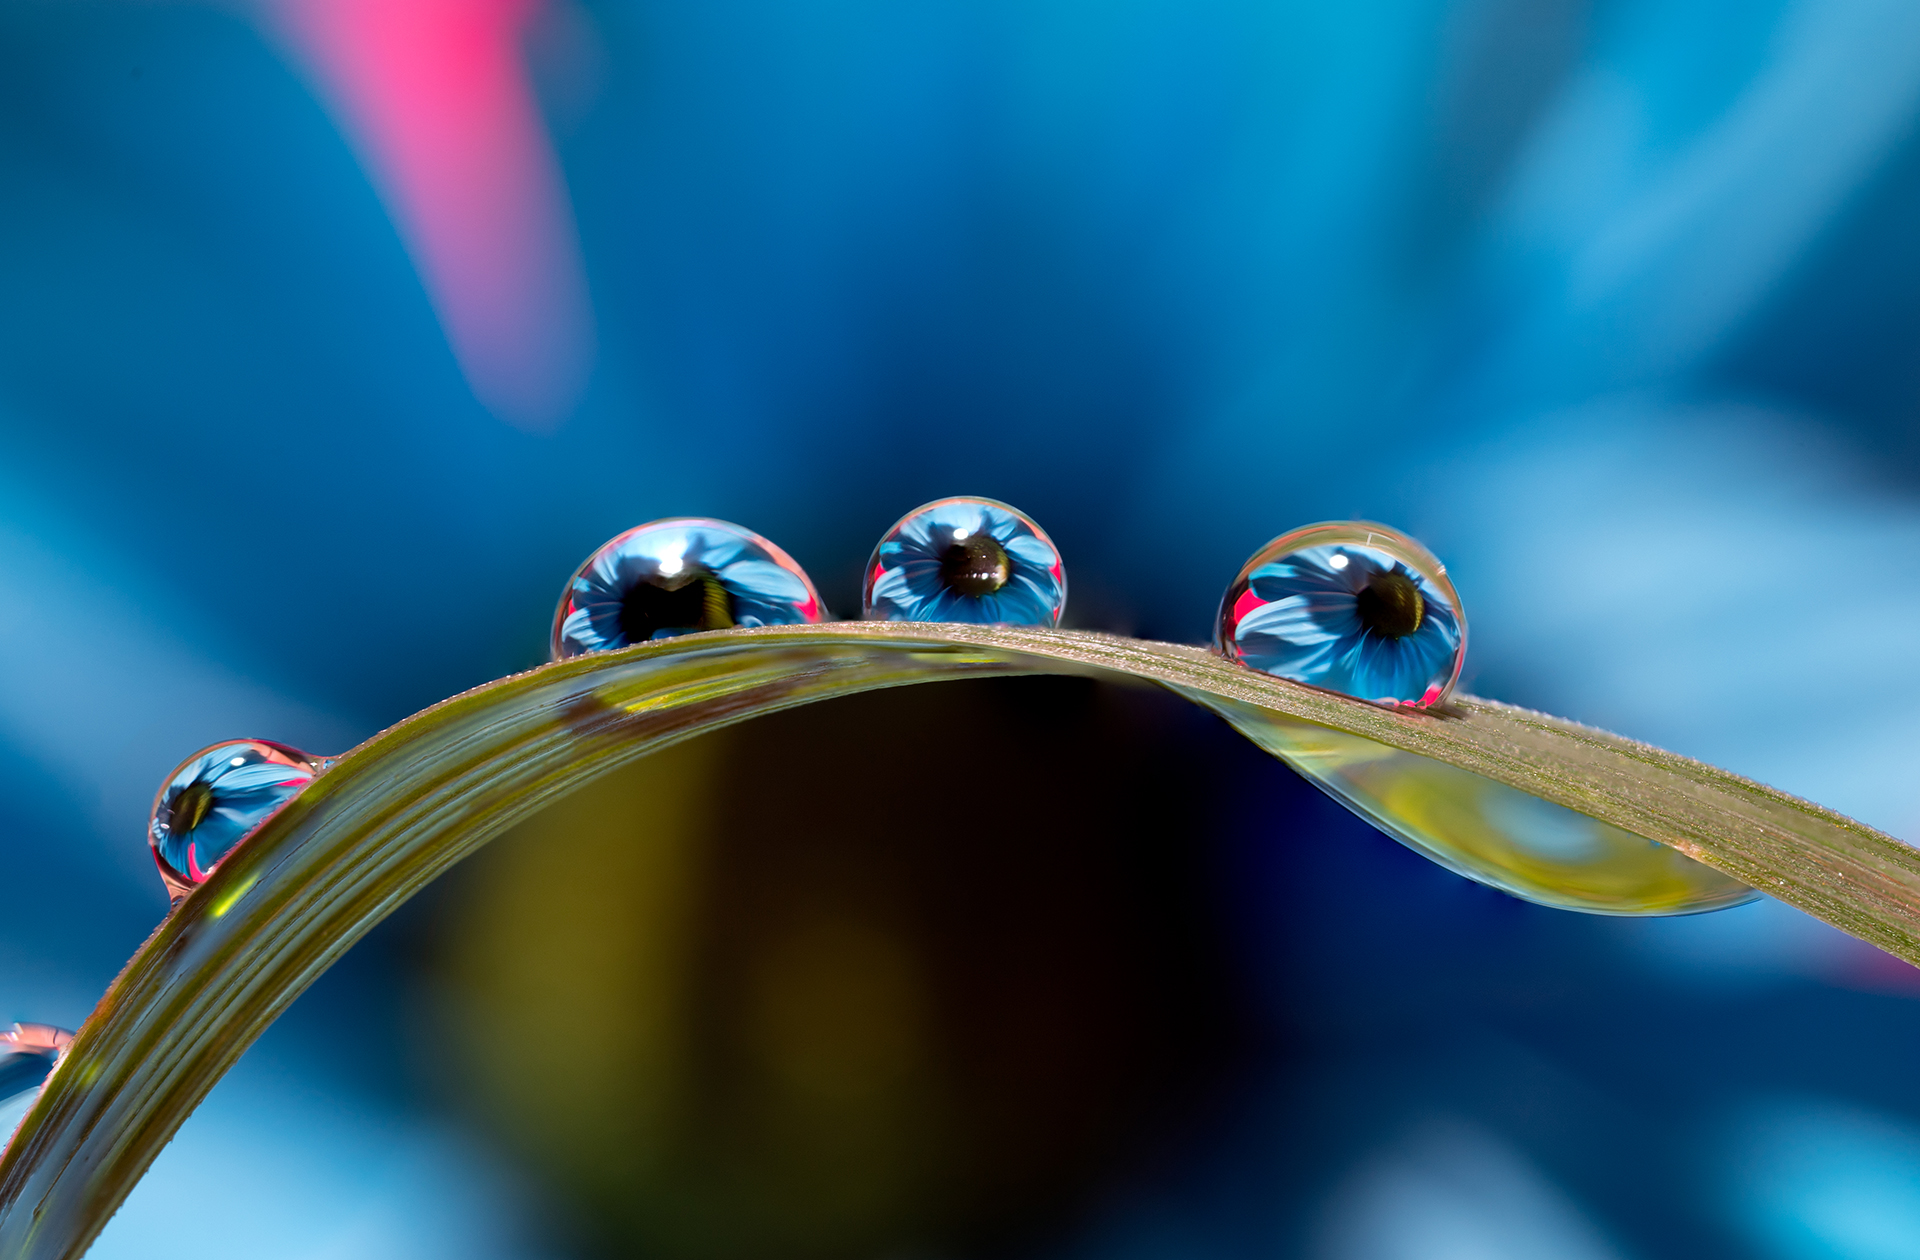 Water Drops on grass with a flower behind